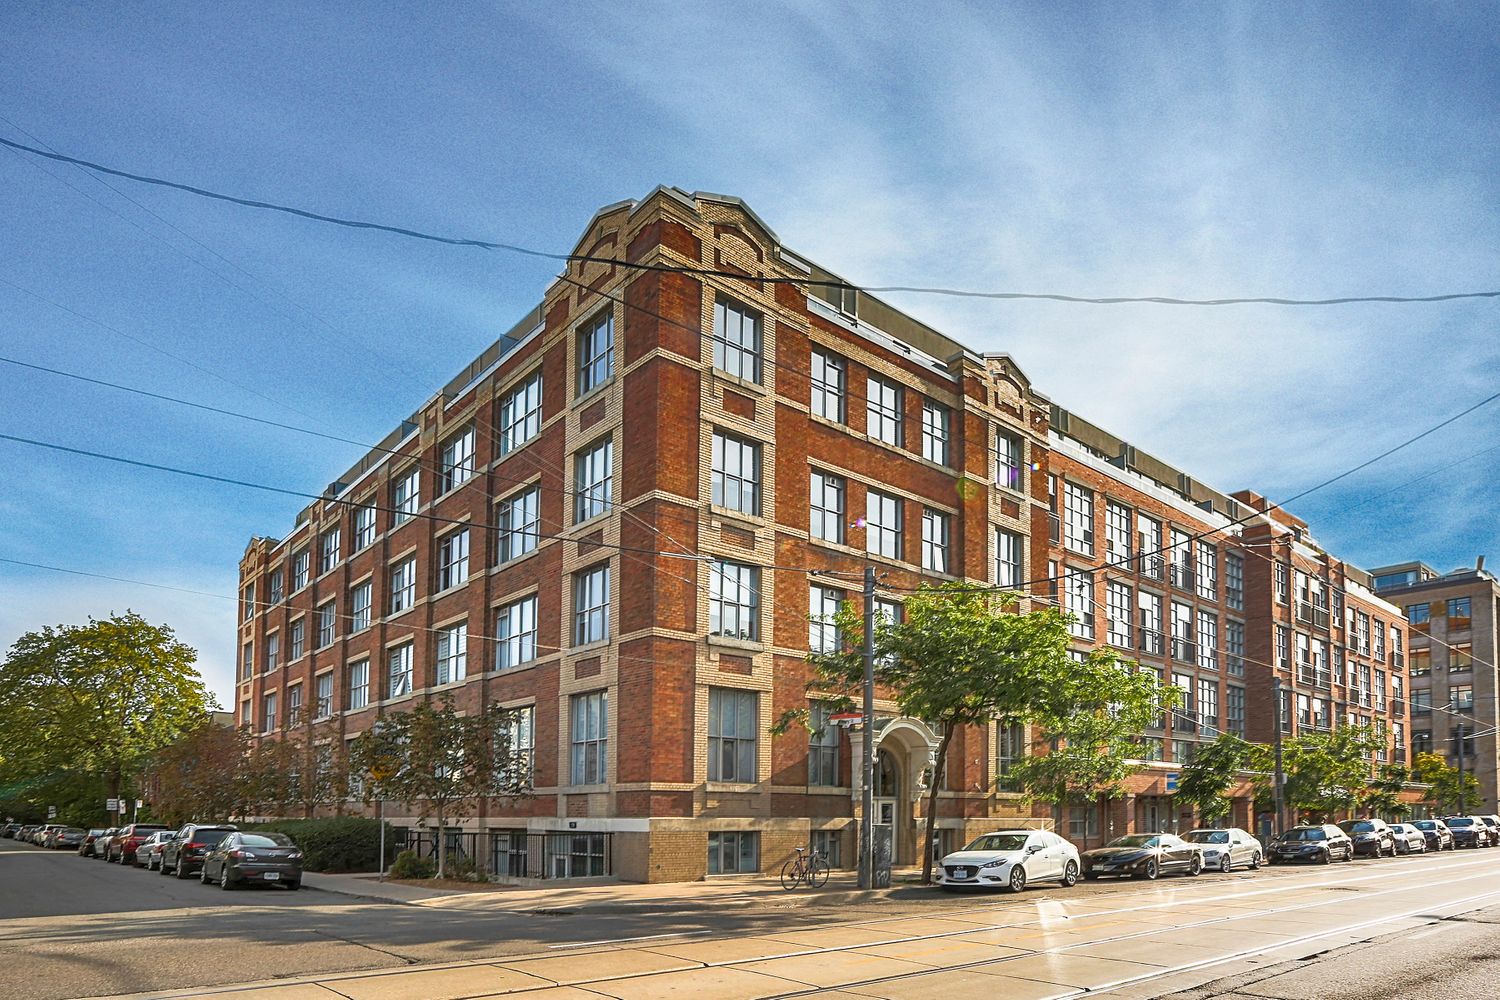 955 Queen Street W. Chocolate Company Lofts is located in  Downtown, Toronto - image #1 of 6